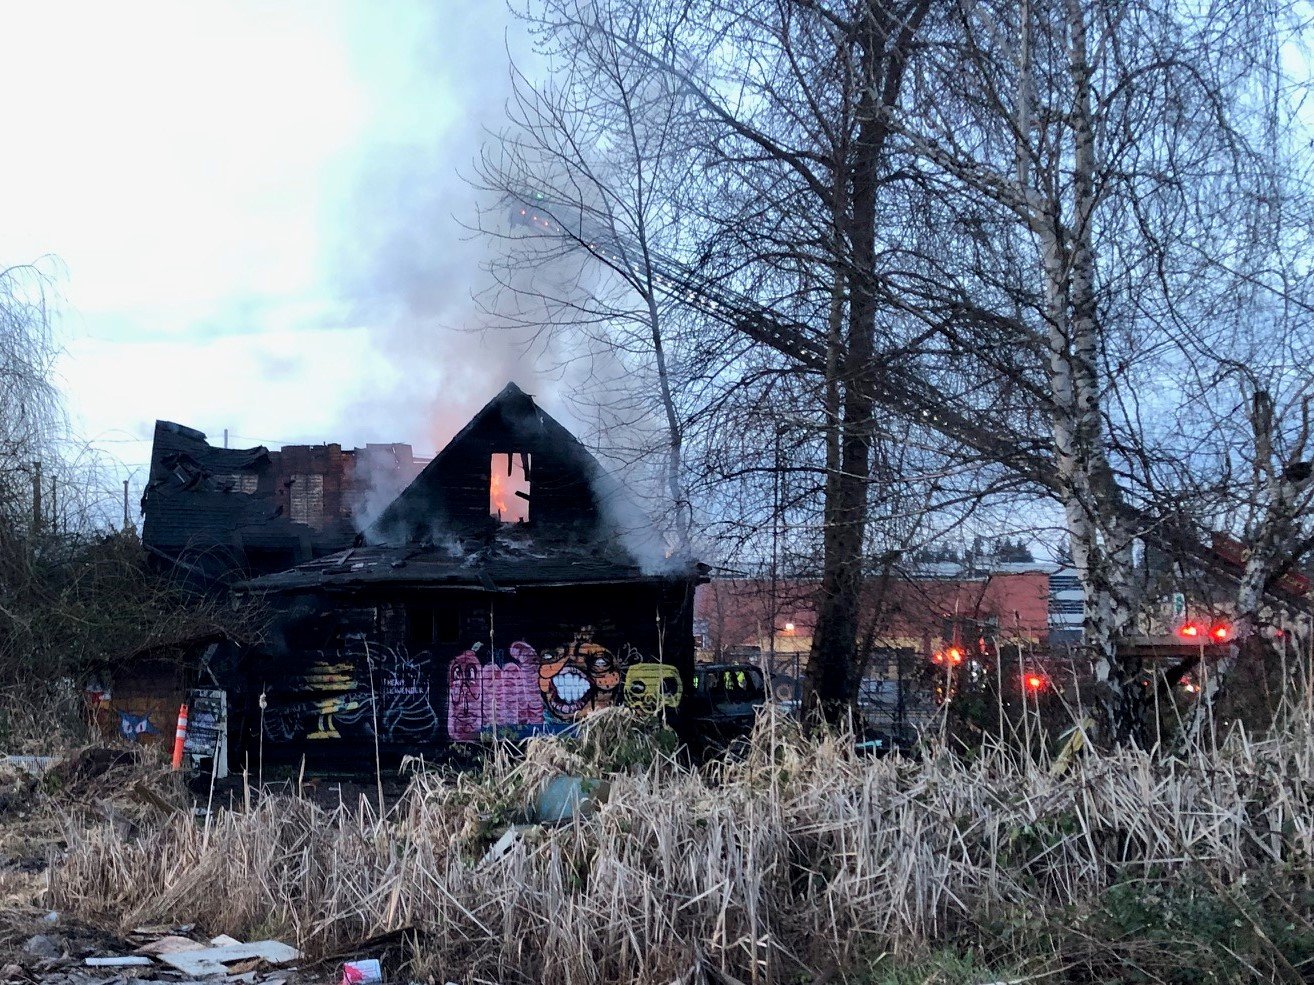 The house at 511 7th Avenue SE continued to burn for approximately four hours. This image is from 7:20 p.m. on Sat., March 18, 2023.